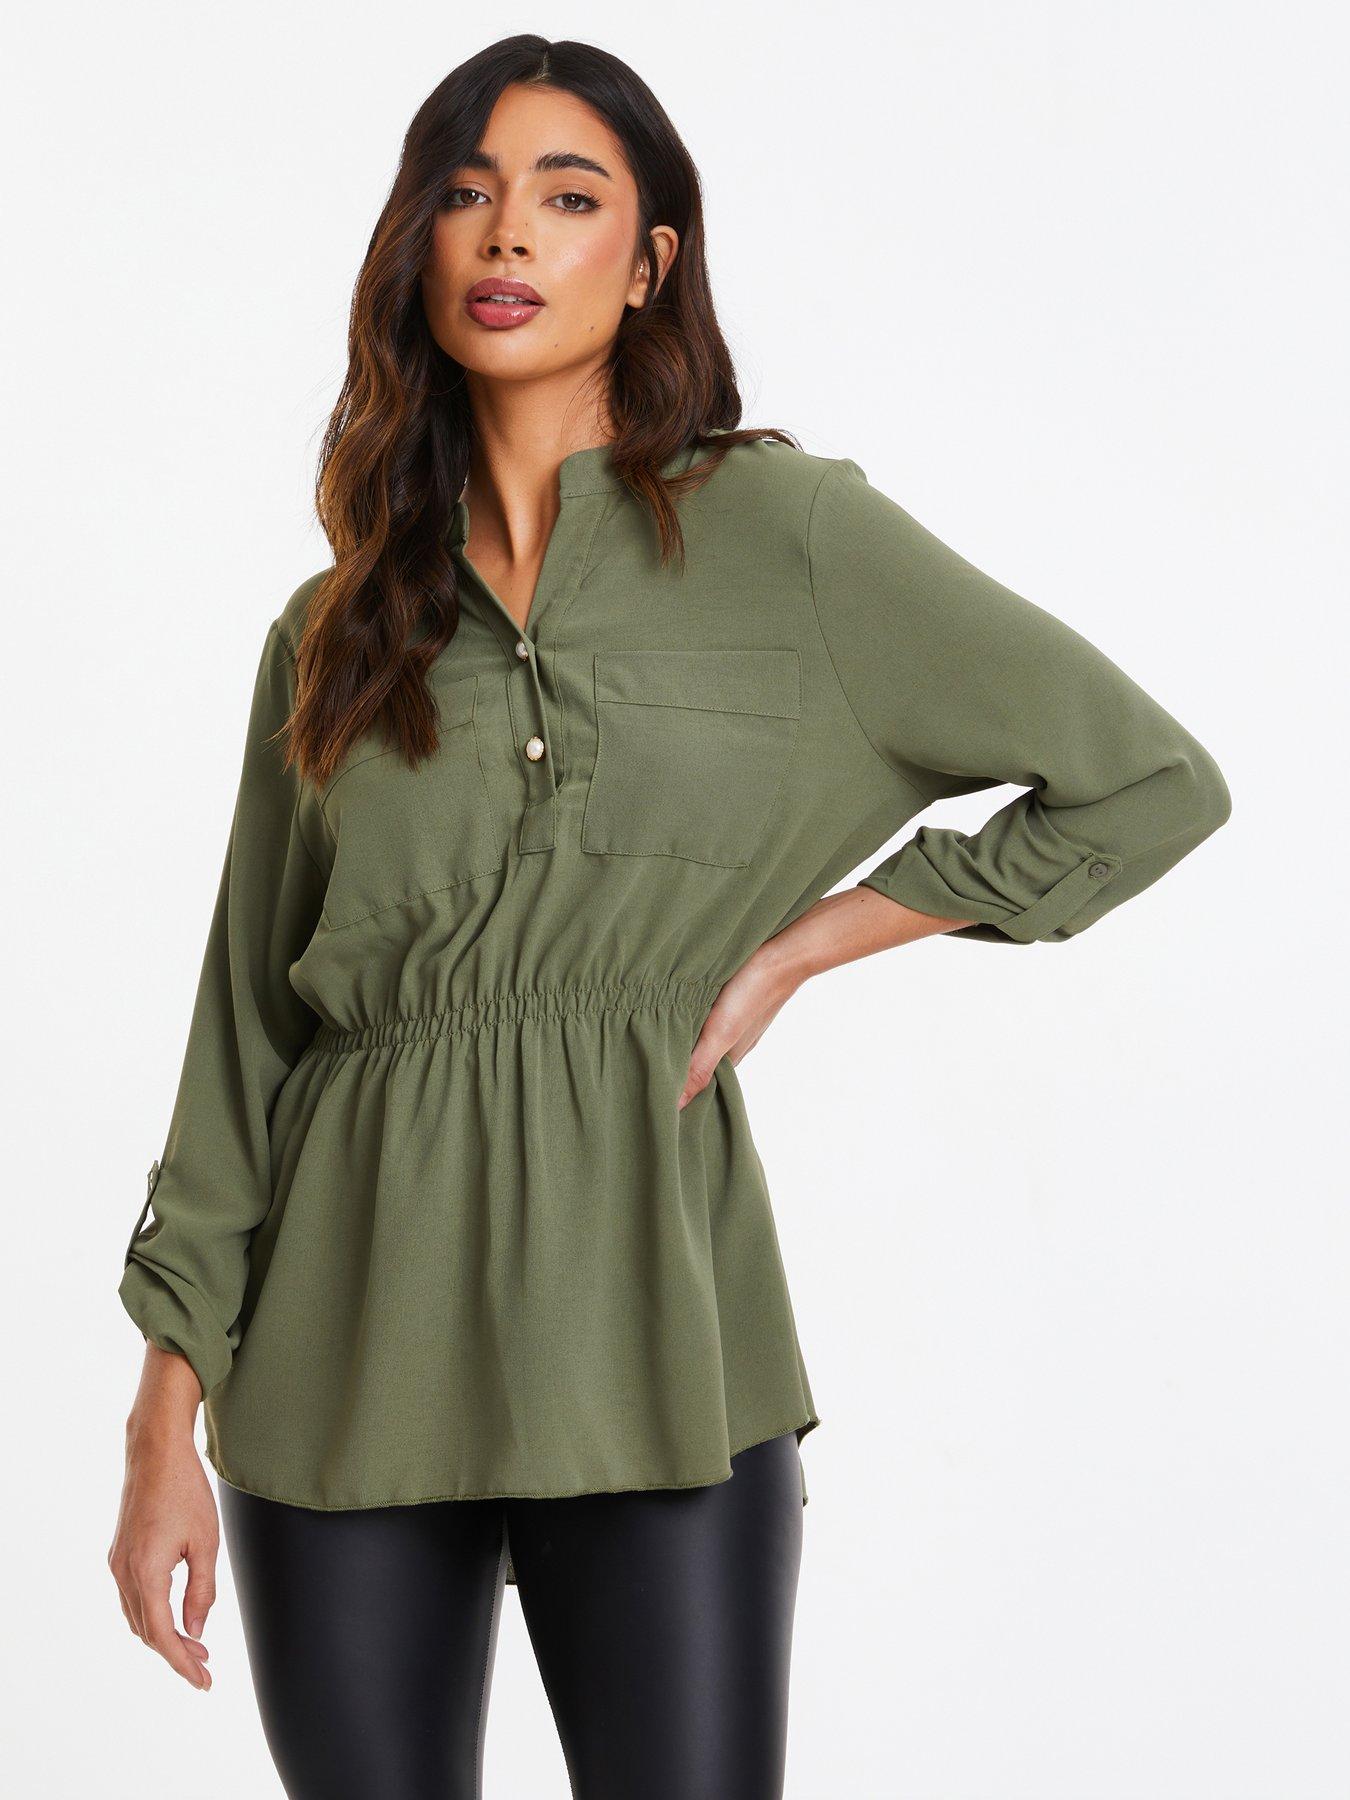 Wrap Tops for Women, Wrap Over Blouses